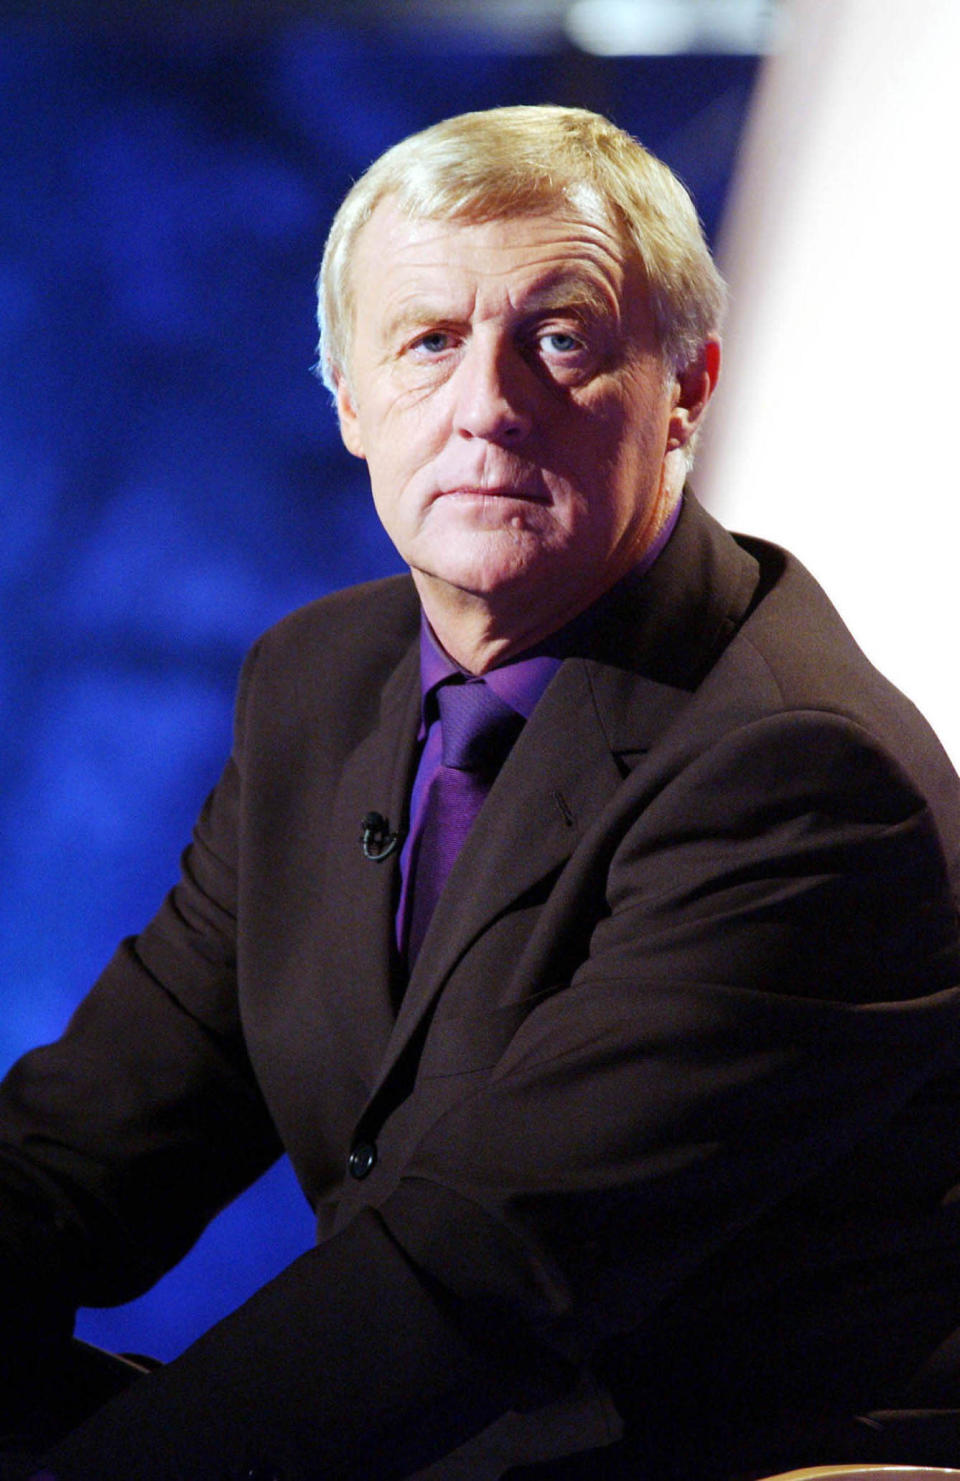 Chris Tarrant during a 2001 celebrity special of the TV game show Who Wants To Be A Millionaire (PA)